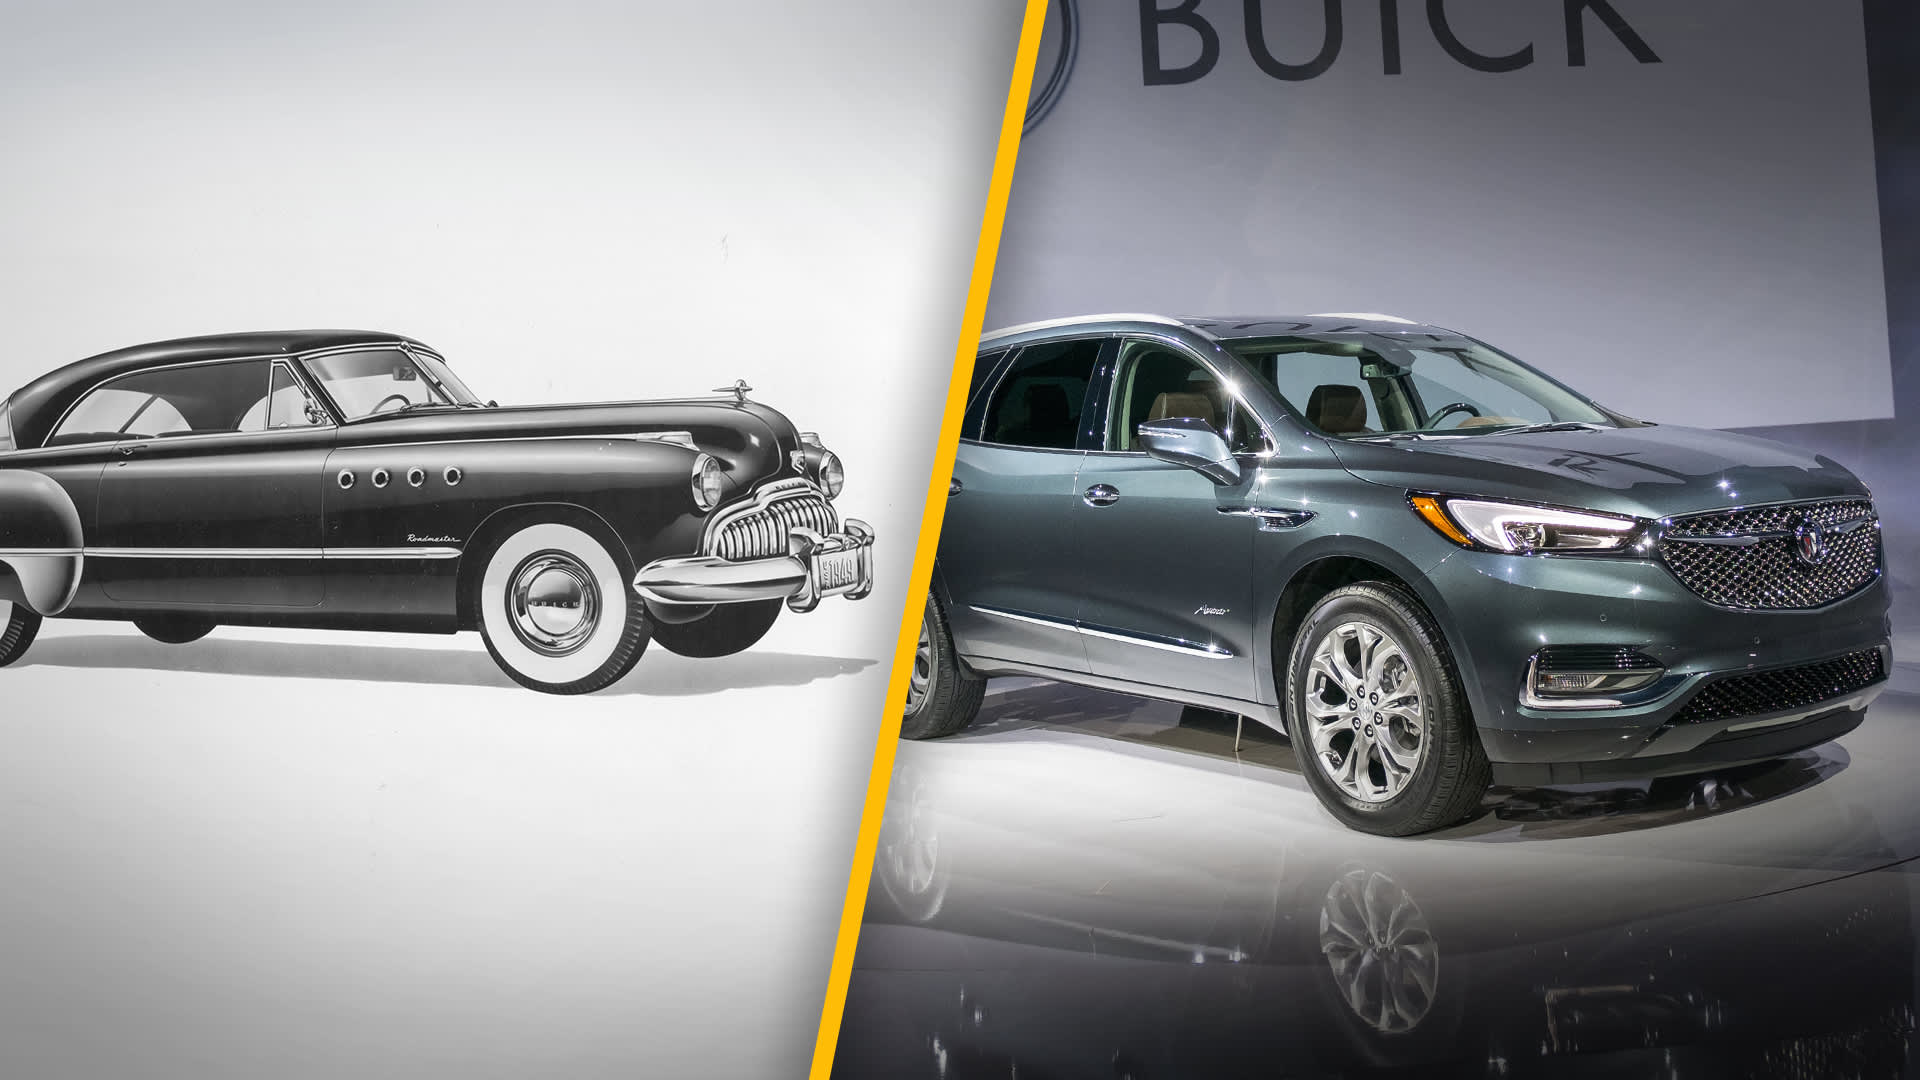 GM continues reinvention of Buick brand with new Enclave SUV [Video]